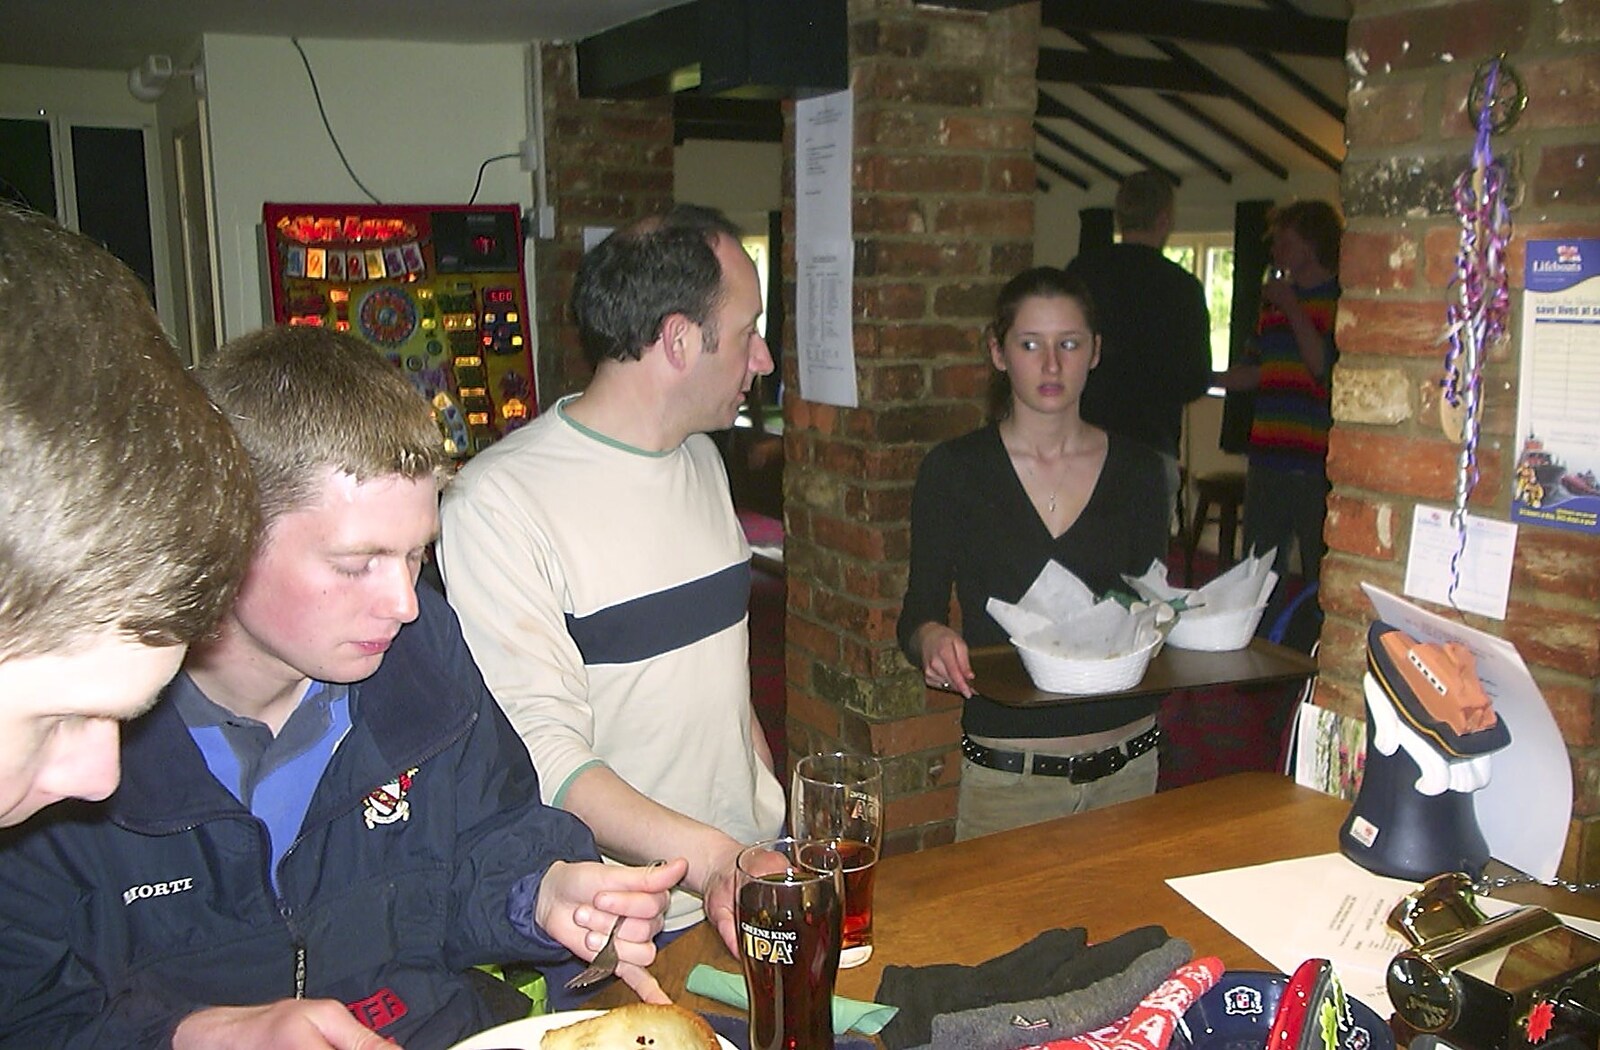 The BSCC Easter Bike Ride, Thelnetham and Redgrave, Suffolk - 10th April 2004: The waitress looks at us suspiciously